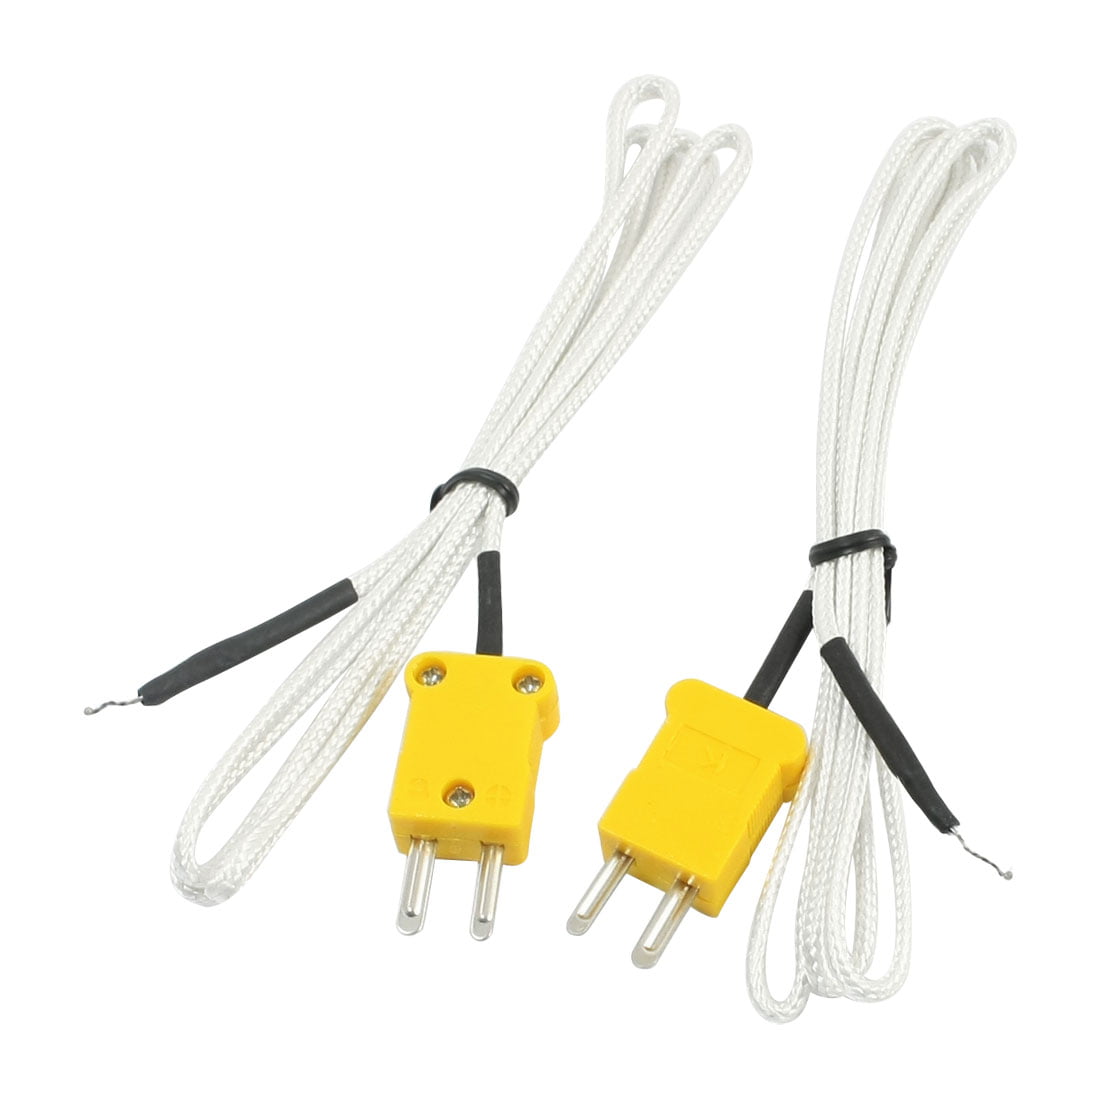 1 Meter 3.3' Thermocouple K Type Cable Probe Sensors With Mini Connector 